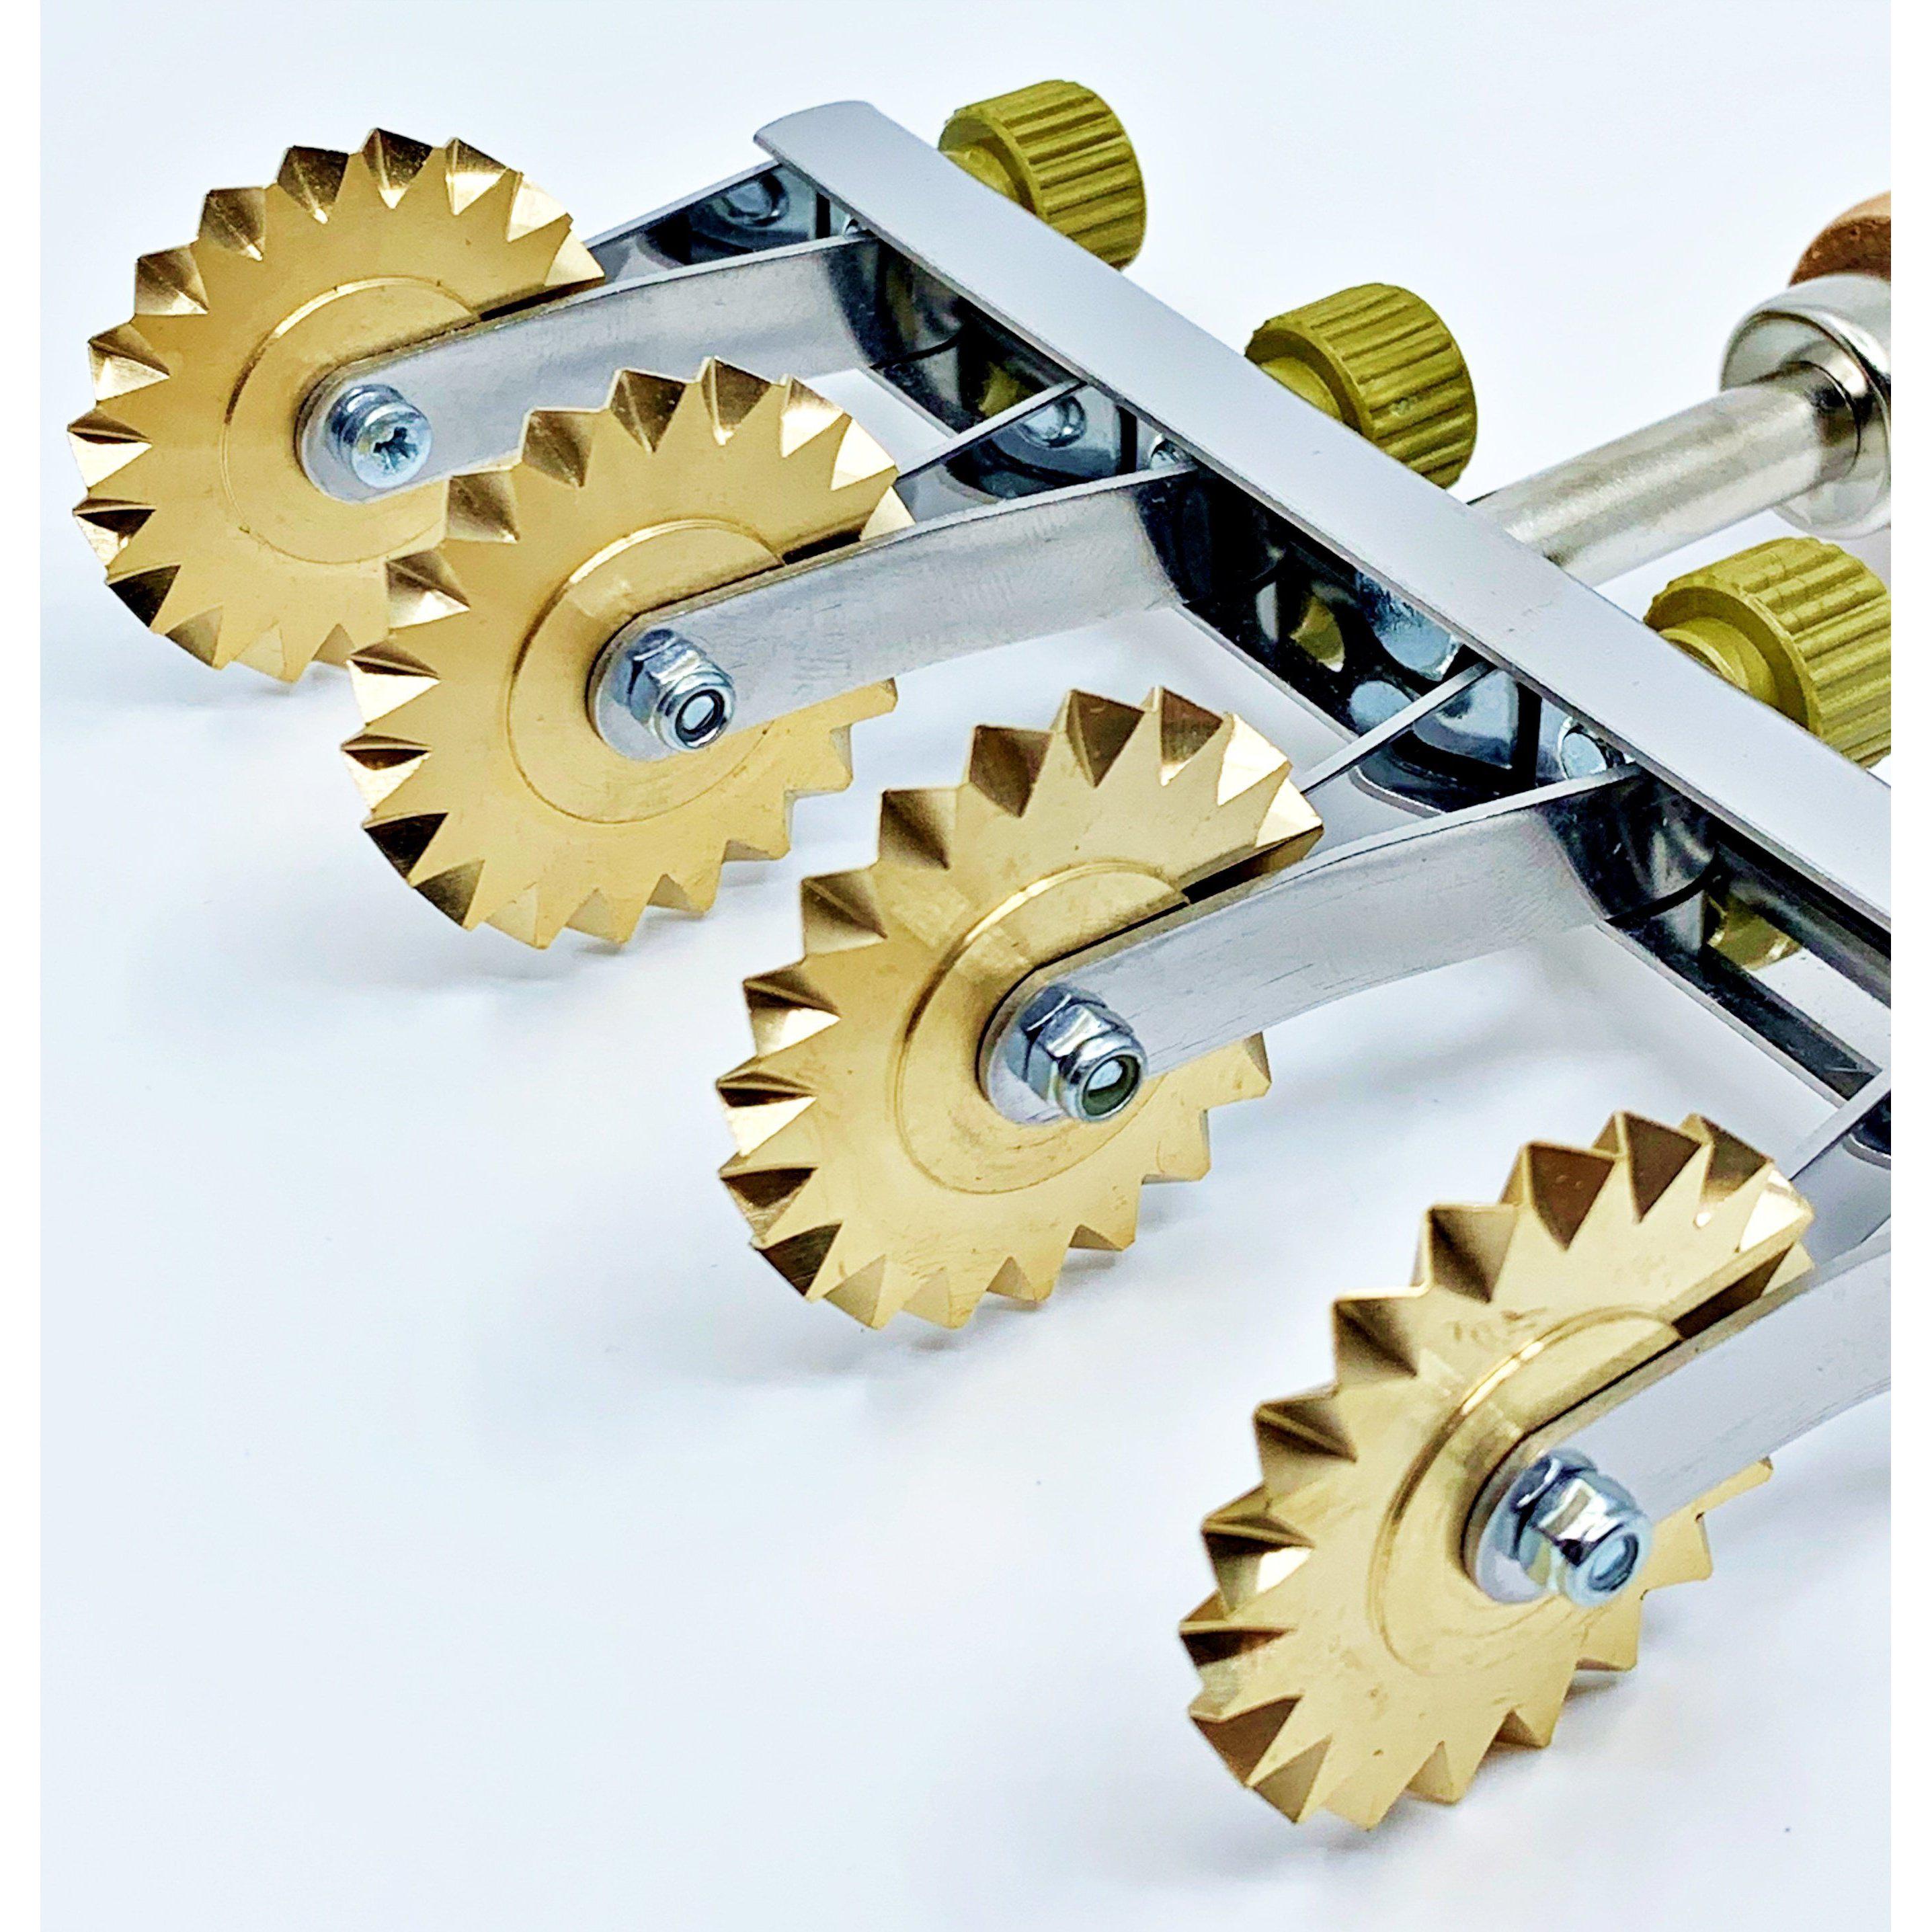 Brass Adjustable Fluted Pastry and Pasta Cutter with 4 Wheels USA